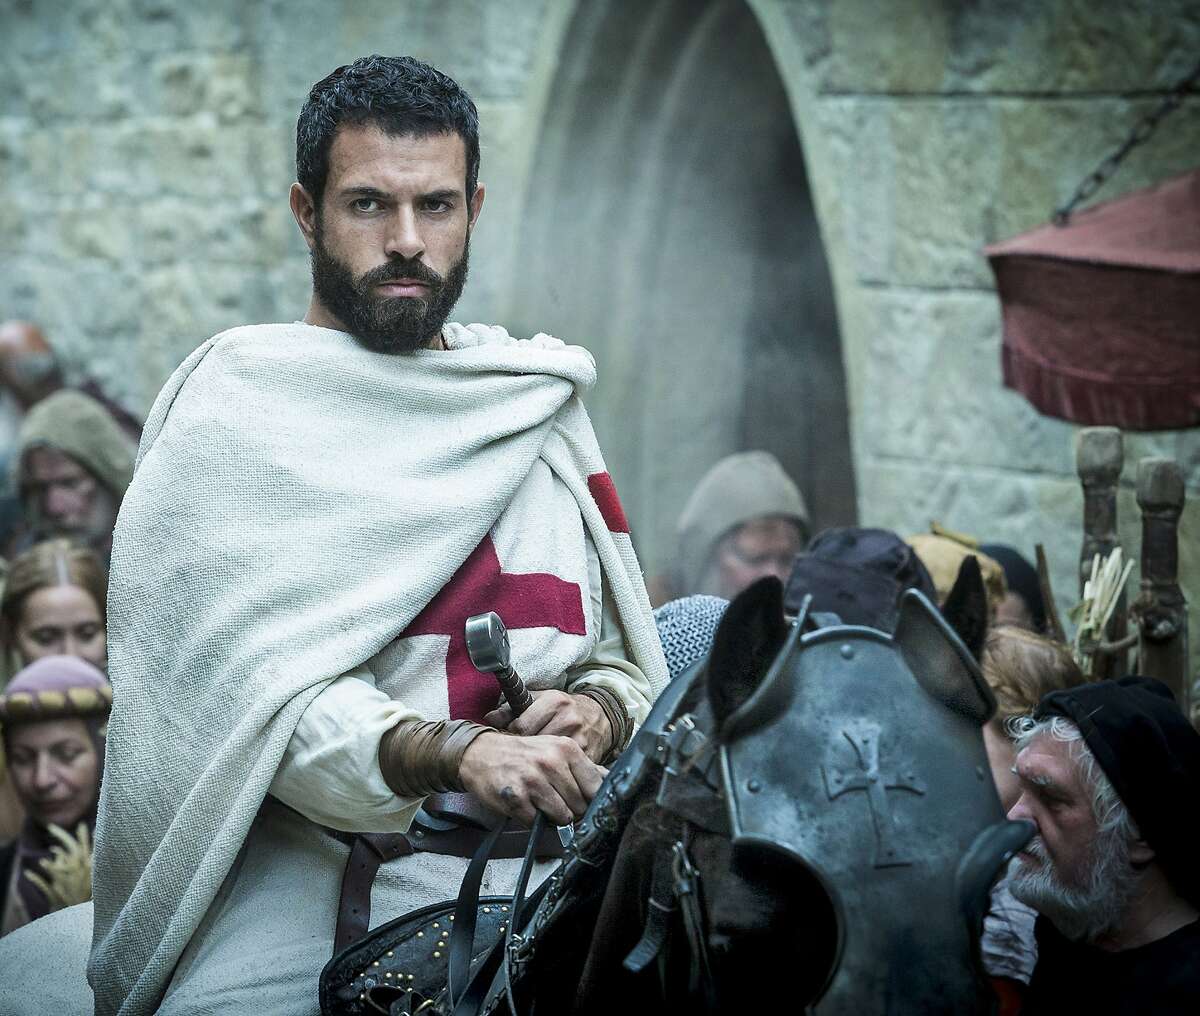 The Knights Templar in pop culture Knightfall Tom Cullen, who once courted Lady Mary on "Downton Abbey," is now the leader of a brave band of Knights Templar in the History Channel's 10-part series, "Knightfall."